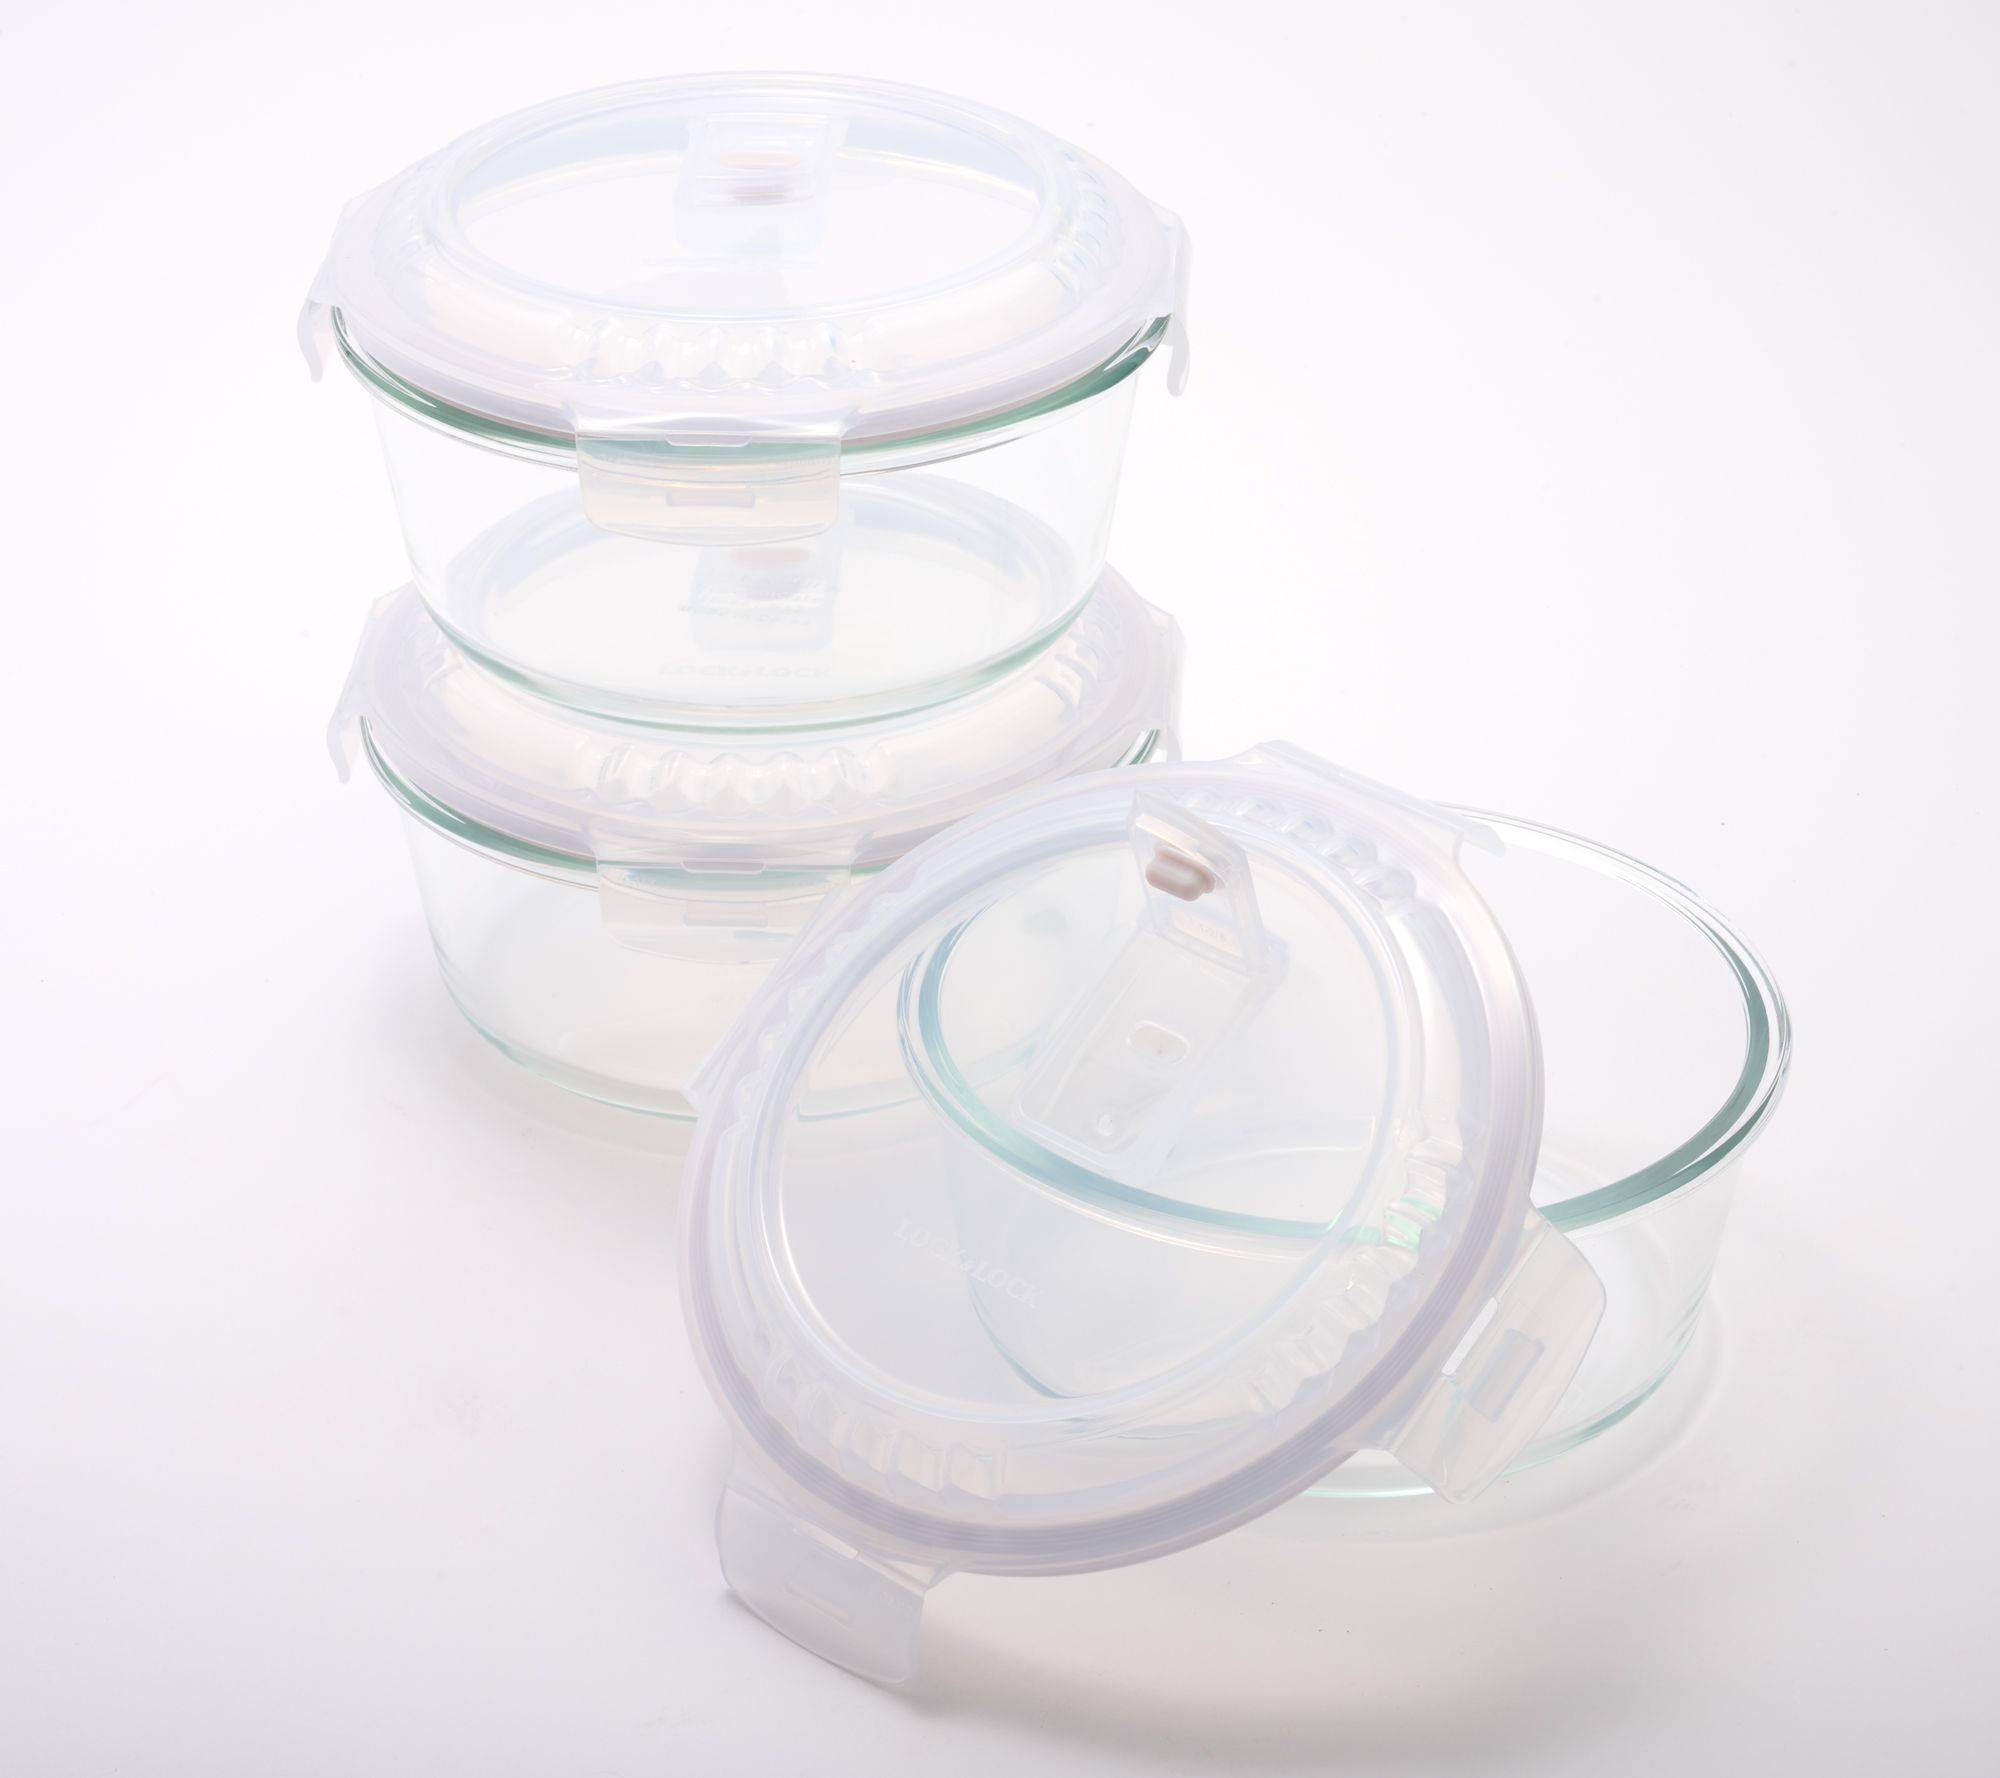 LocknLock Set of (3) 4-Cup Vented Glass BowlStorage Set ,Clear